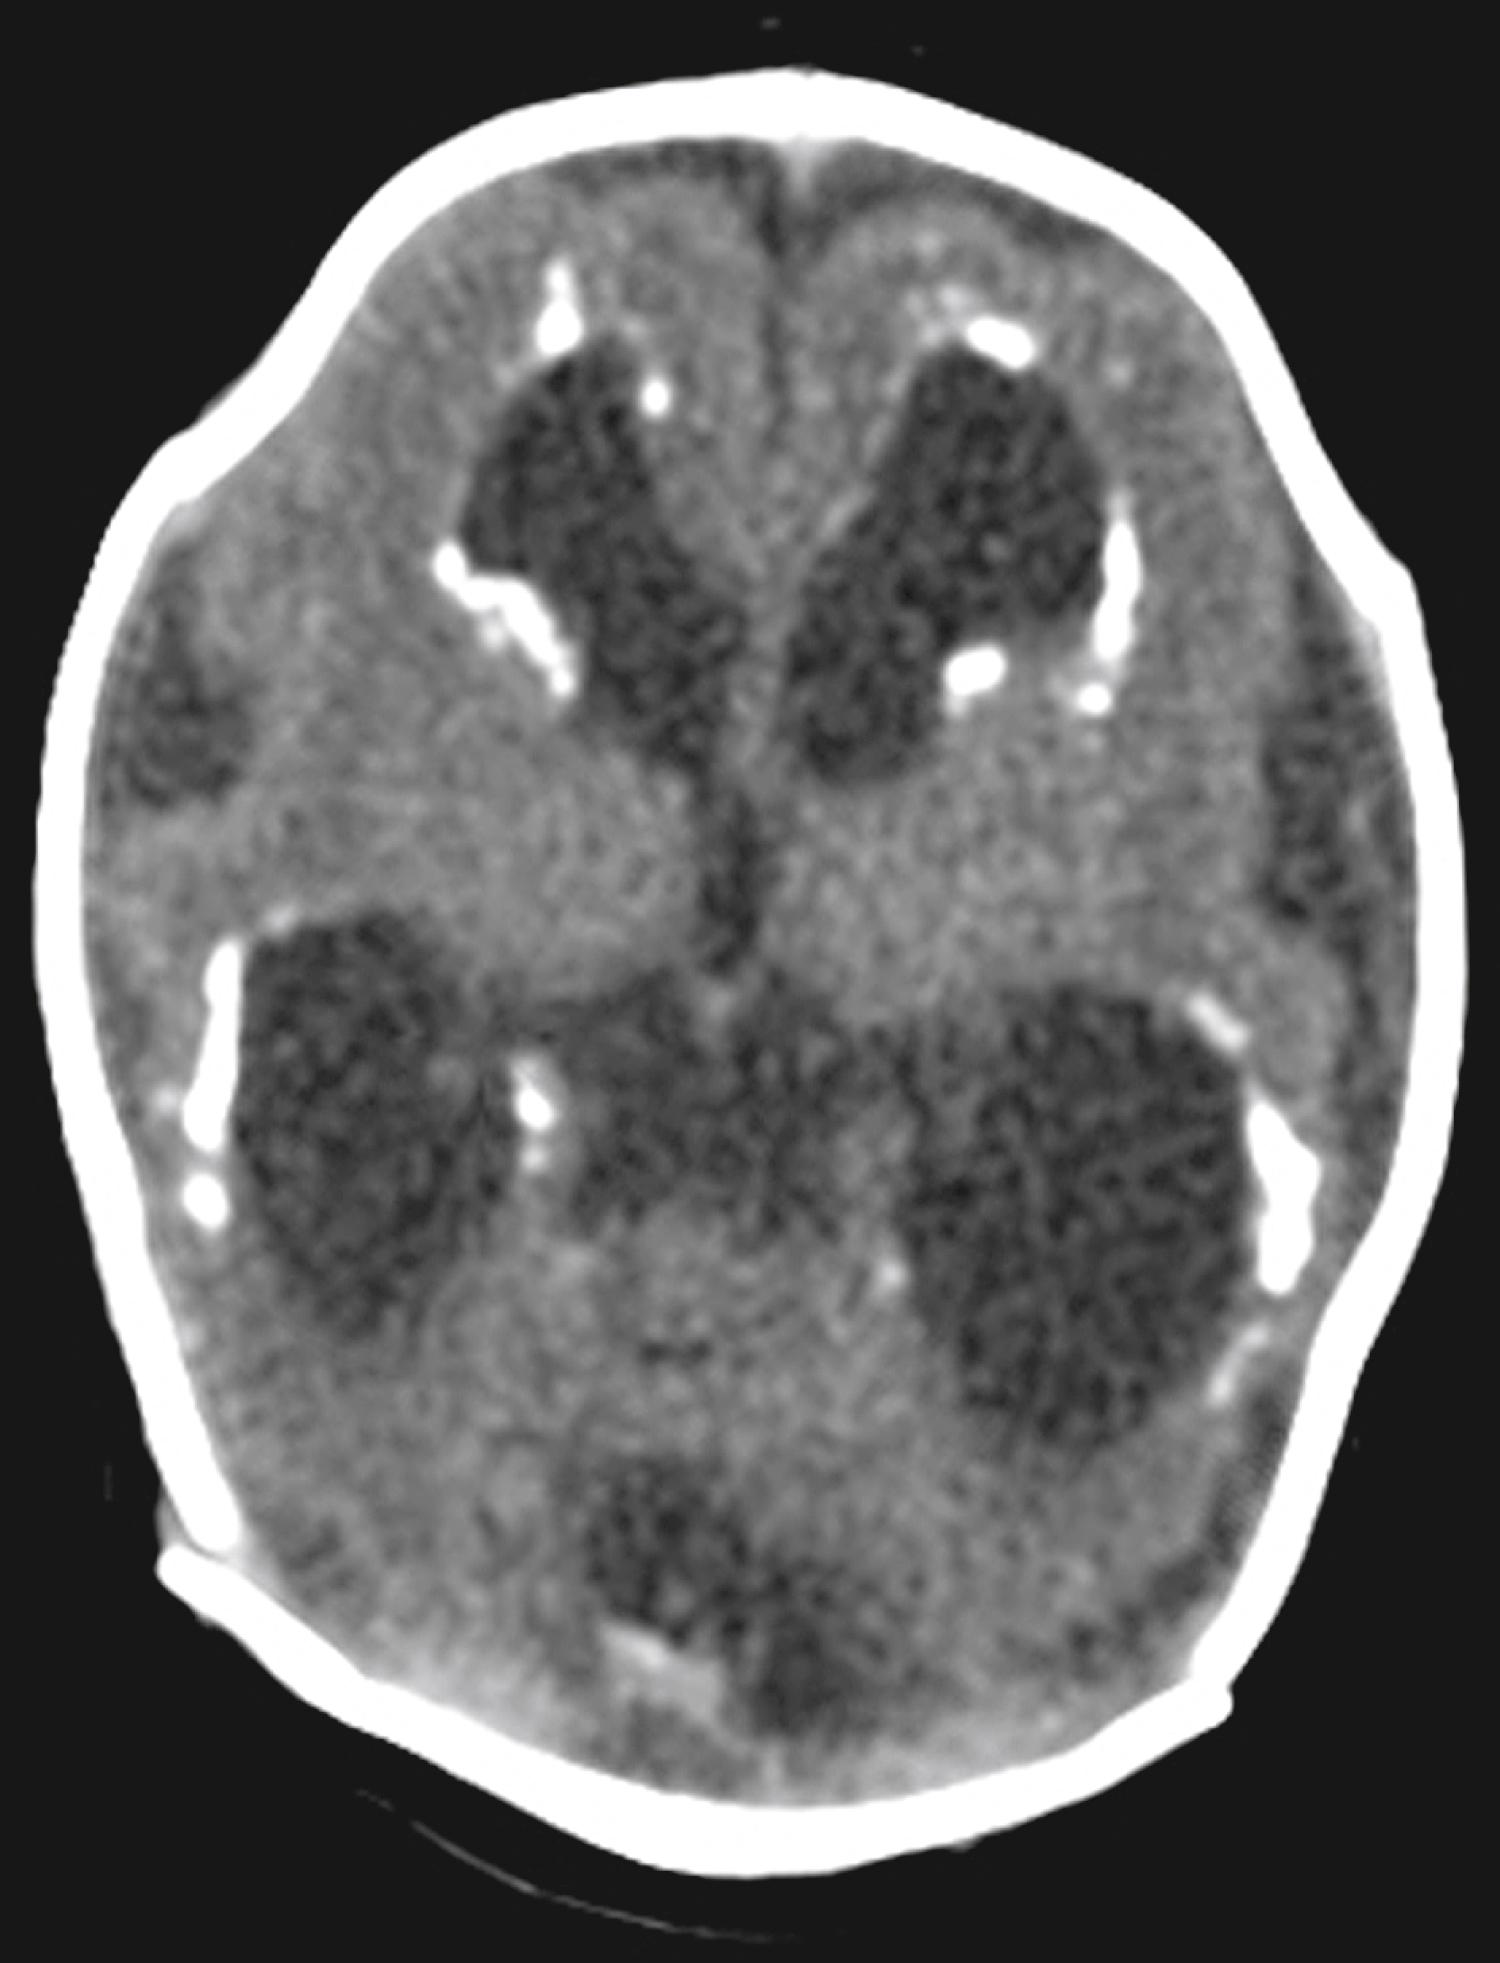 Fig. 16.23, Computed tomography (CT) scan revealing bilateral periventricular cerebral calcifications with ventricular dilation in infant with severe congenital cytomegalovirus infection.